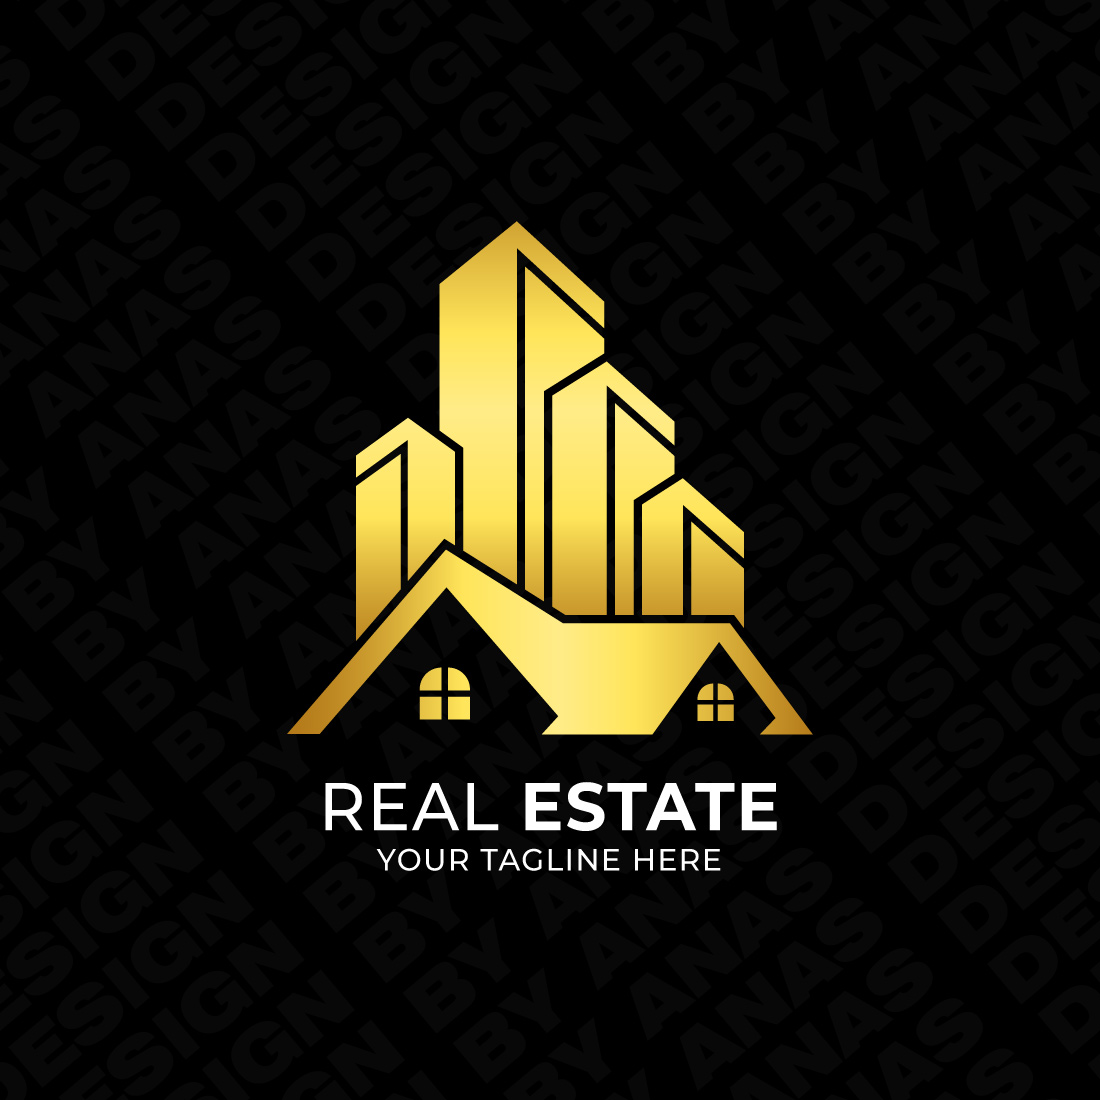 Luxury Real Estate Logo Design, Building Logo Template – ONLY $9 preview image.